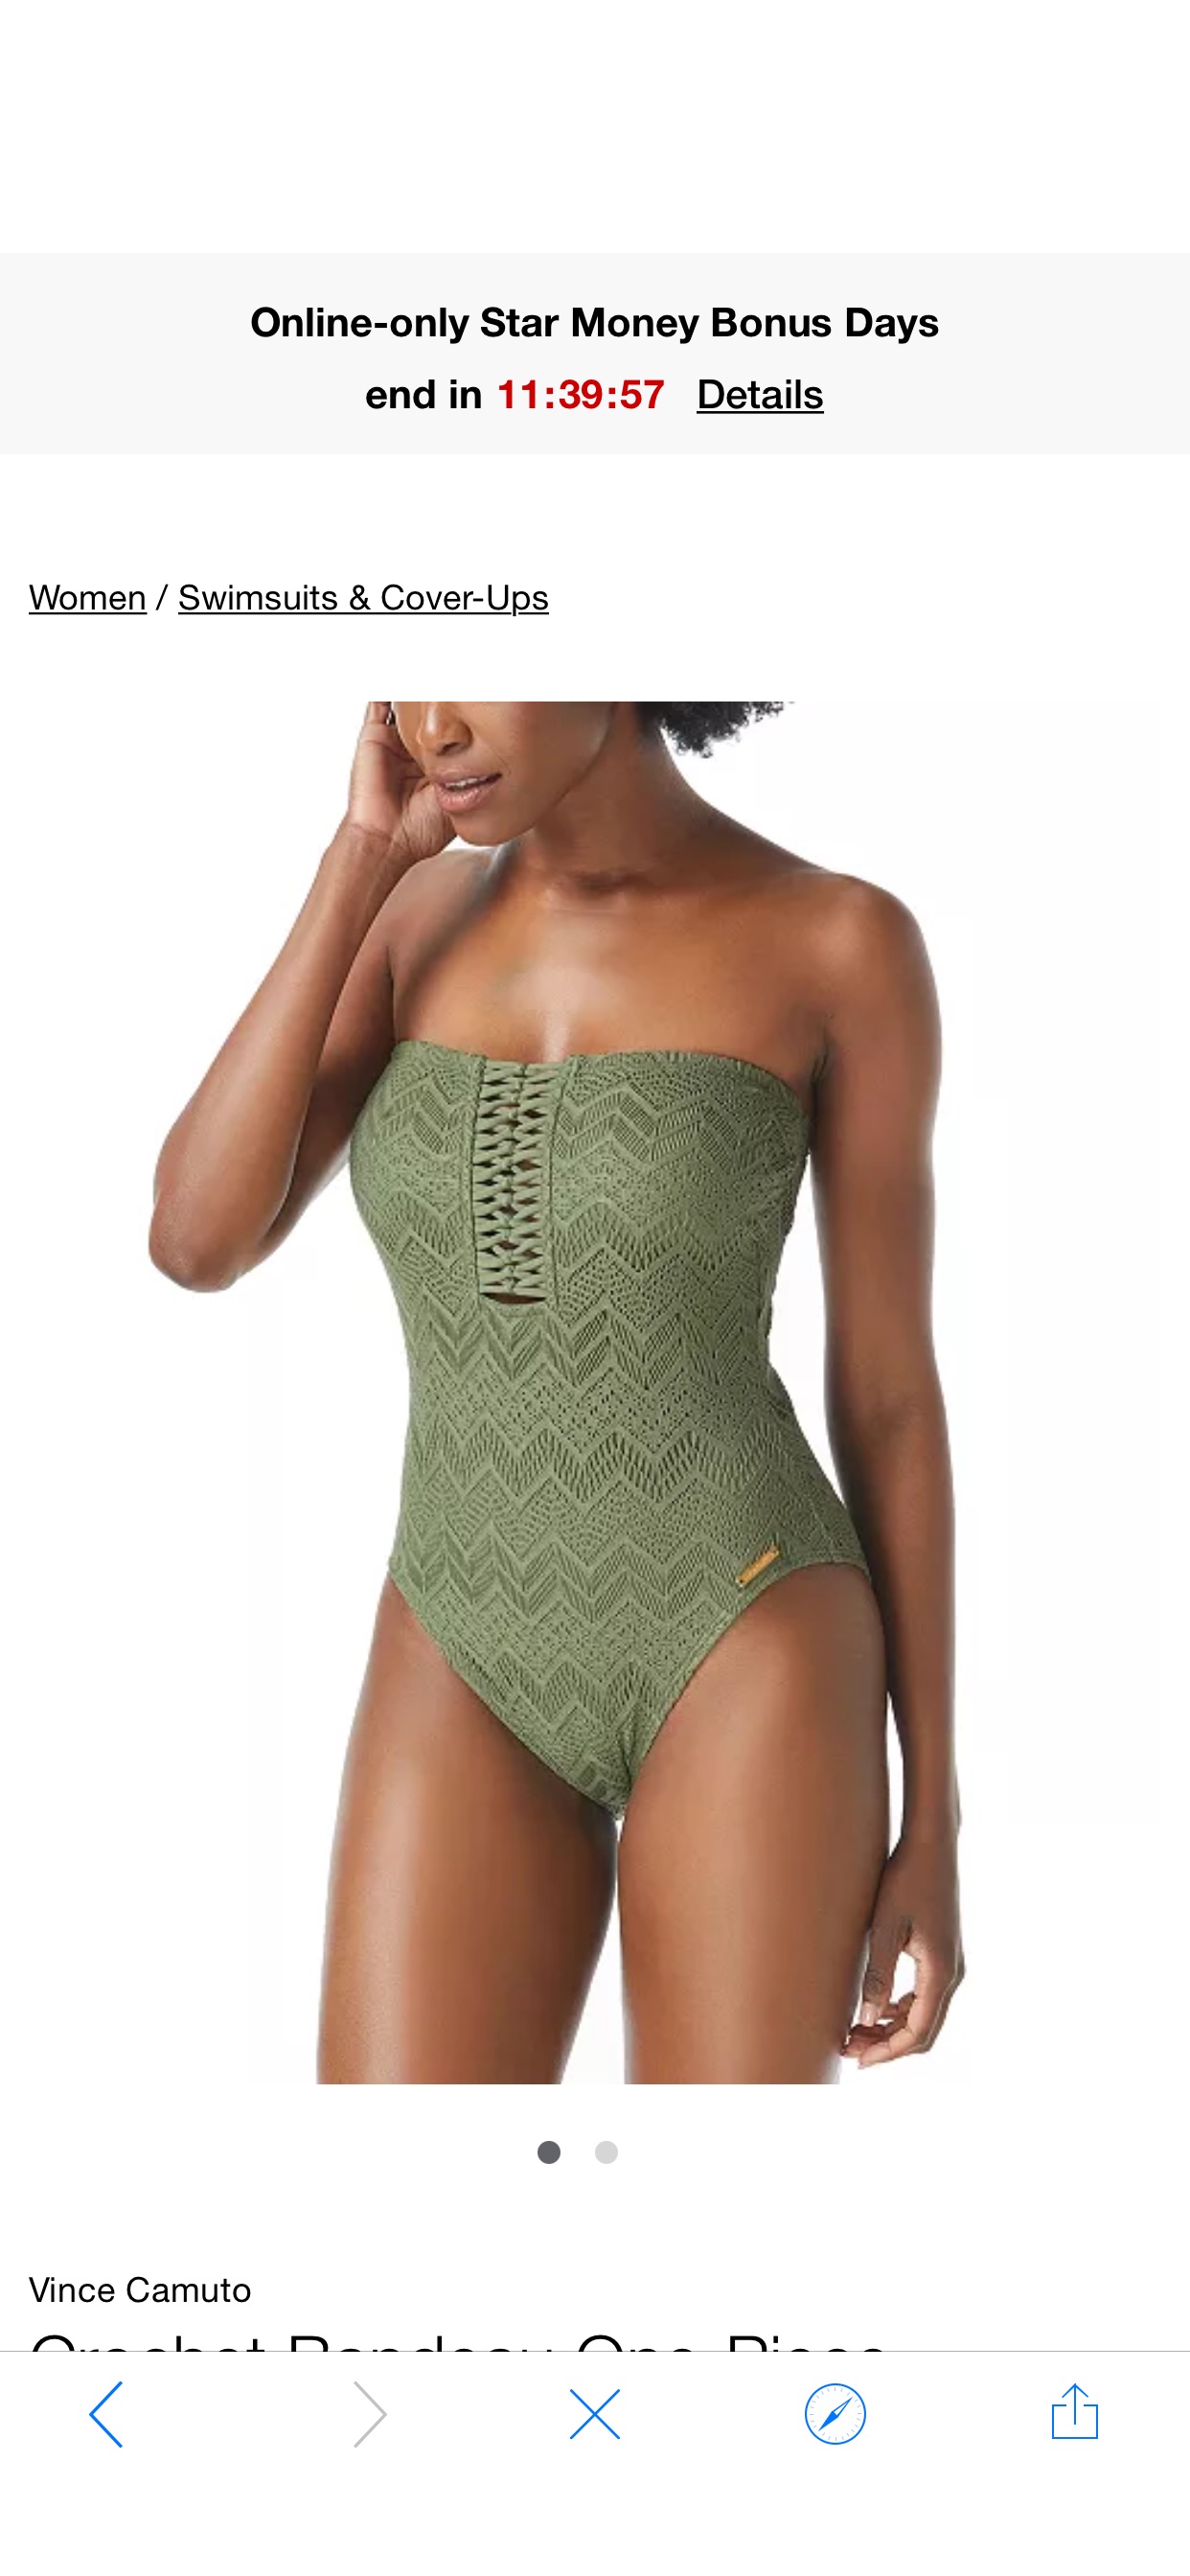 Vince Camuto Crochet Bandeau One-Piece Swimsuit & Reviews - Swimsuits & Cover-Ups - Women - Macy's
泳装